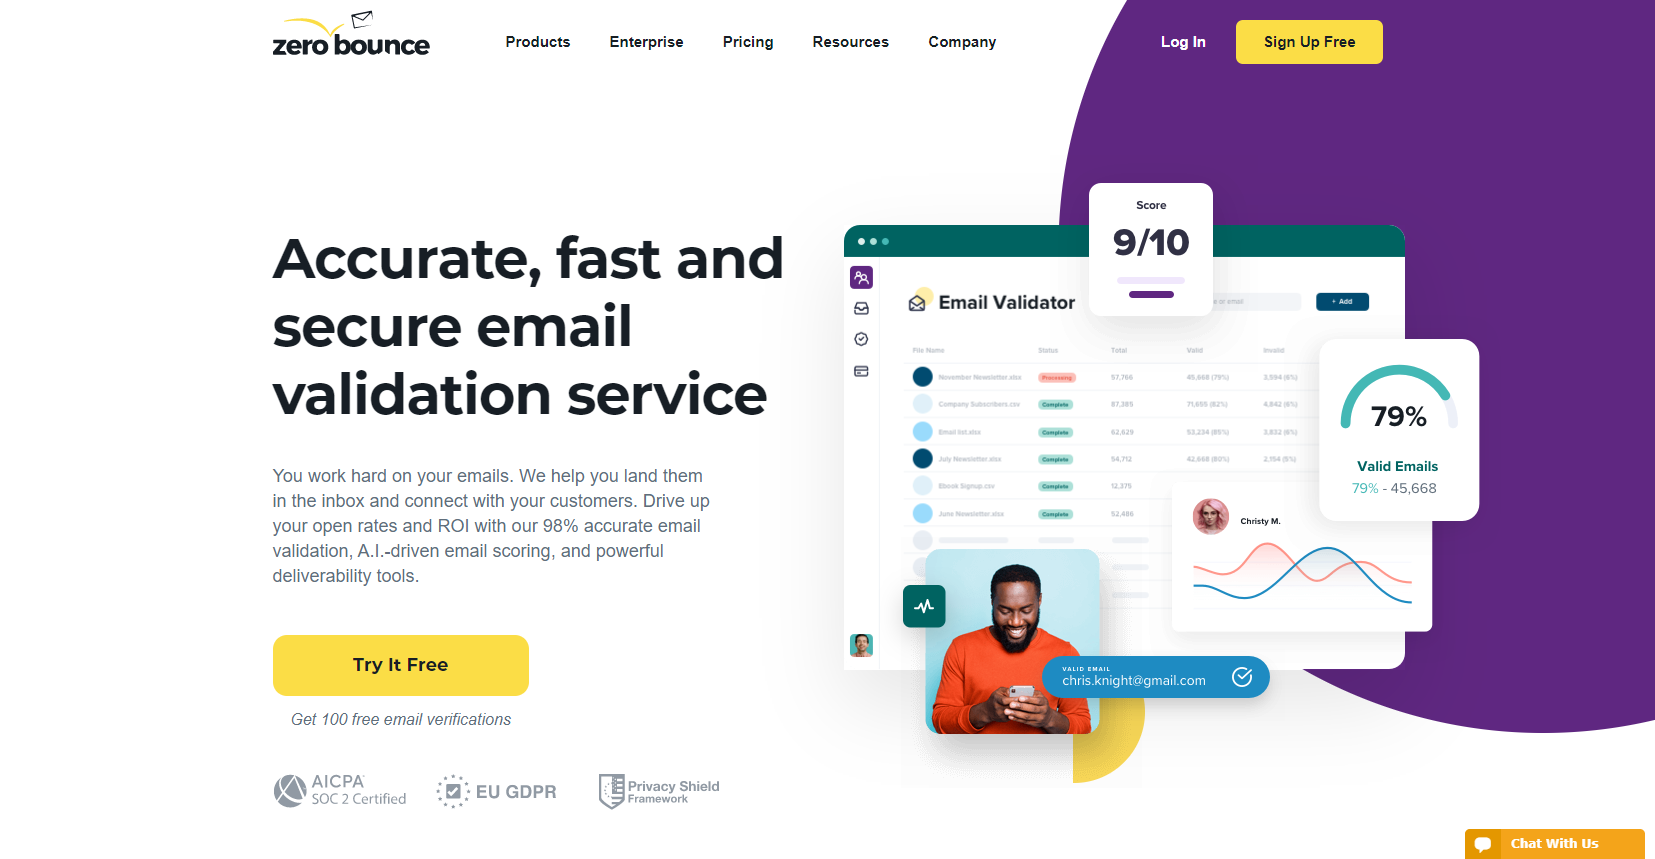 ZeroBounce offers accurate, fast and secure email validation